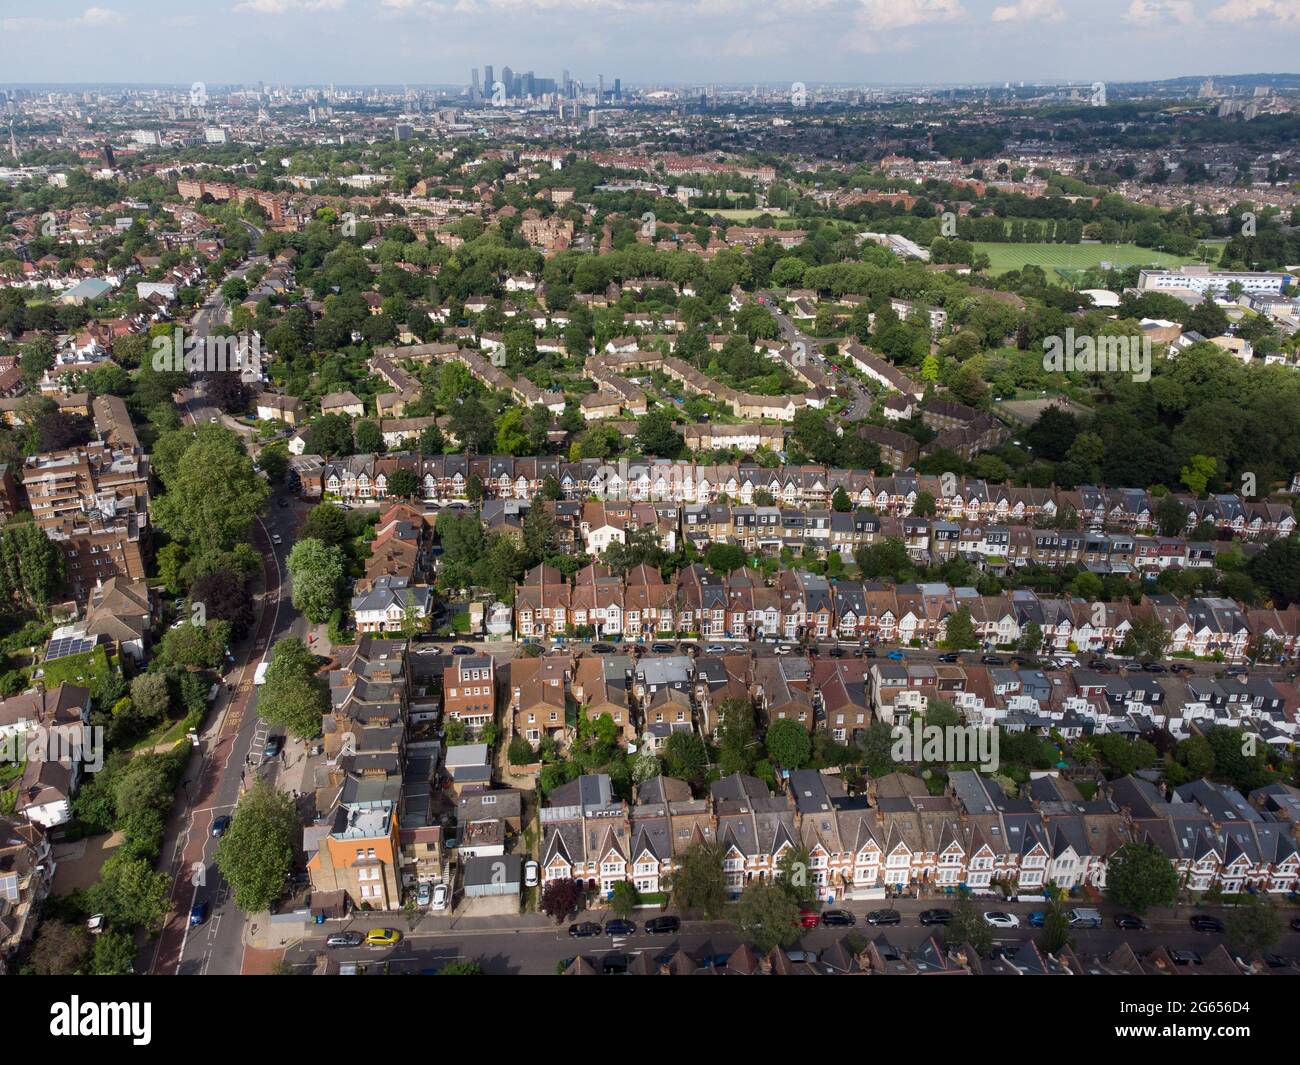 Herne hill, south london, england Stock Photo